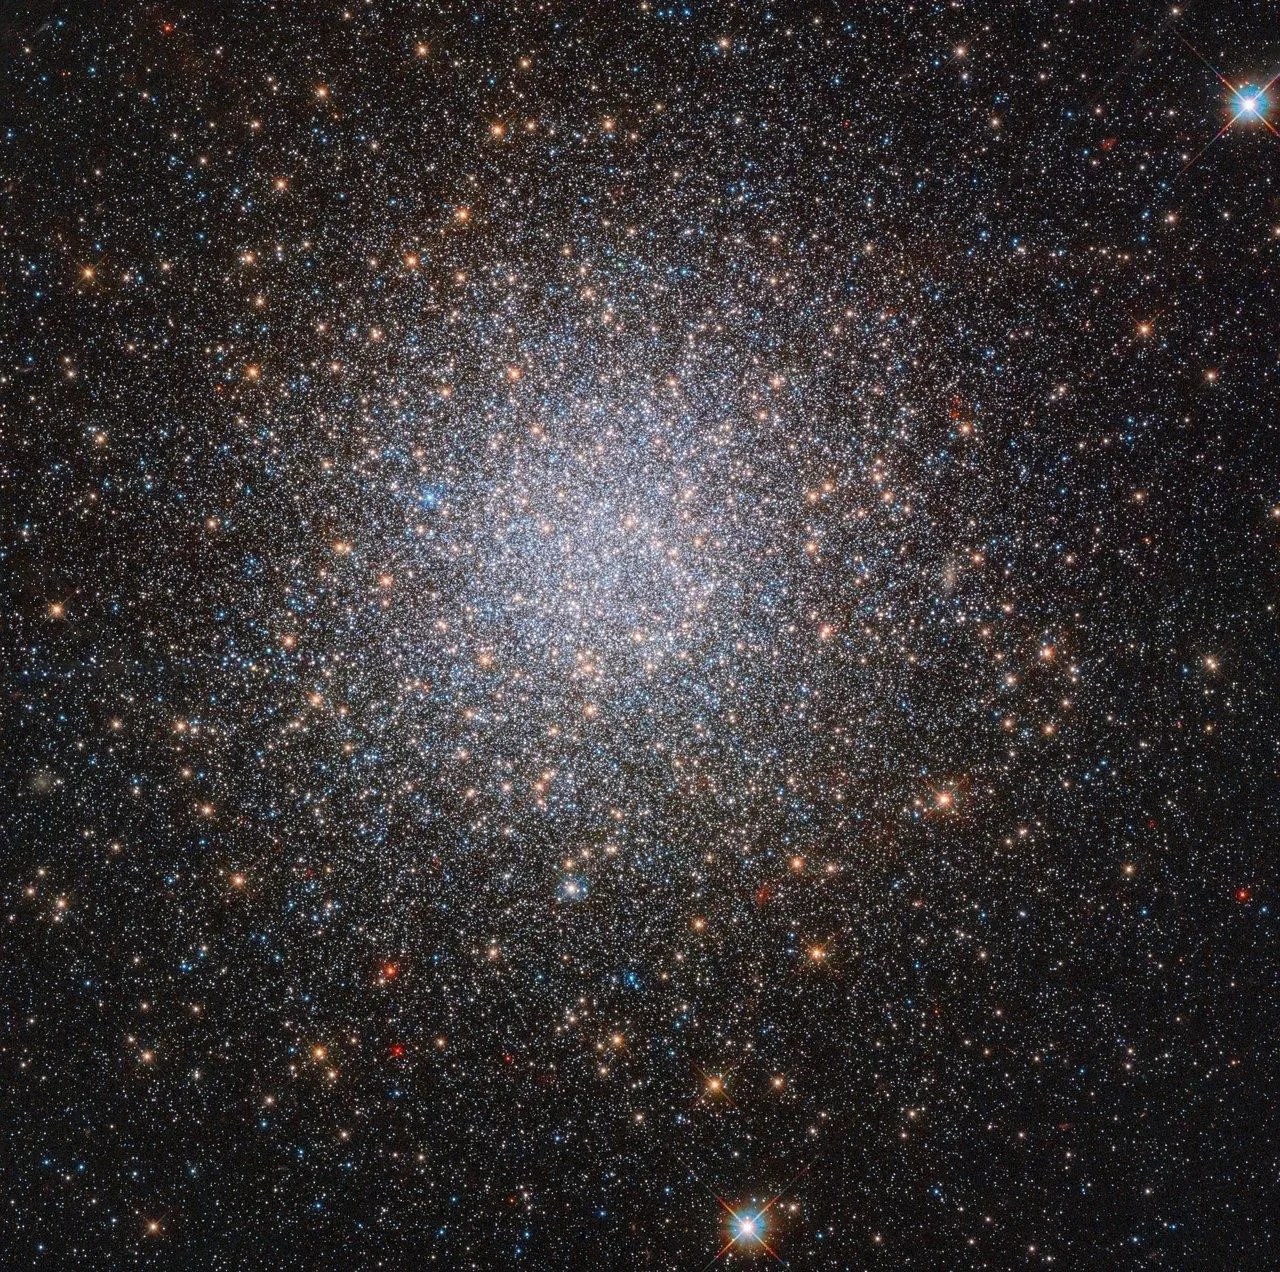 Huge grouping of countless stars, in colors red, blue, white, yellow. The closer to the center of the image, the brighter, and whiter it gets.